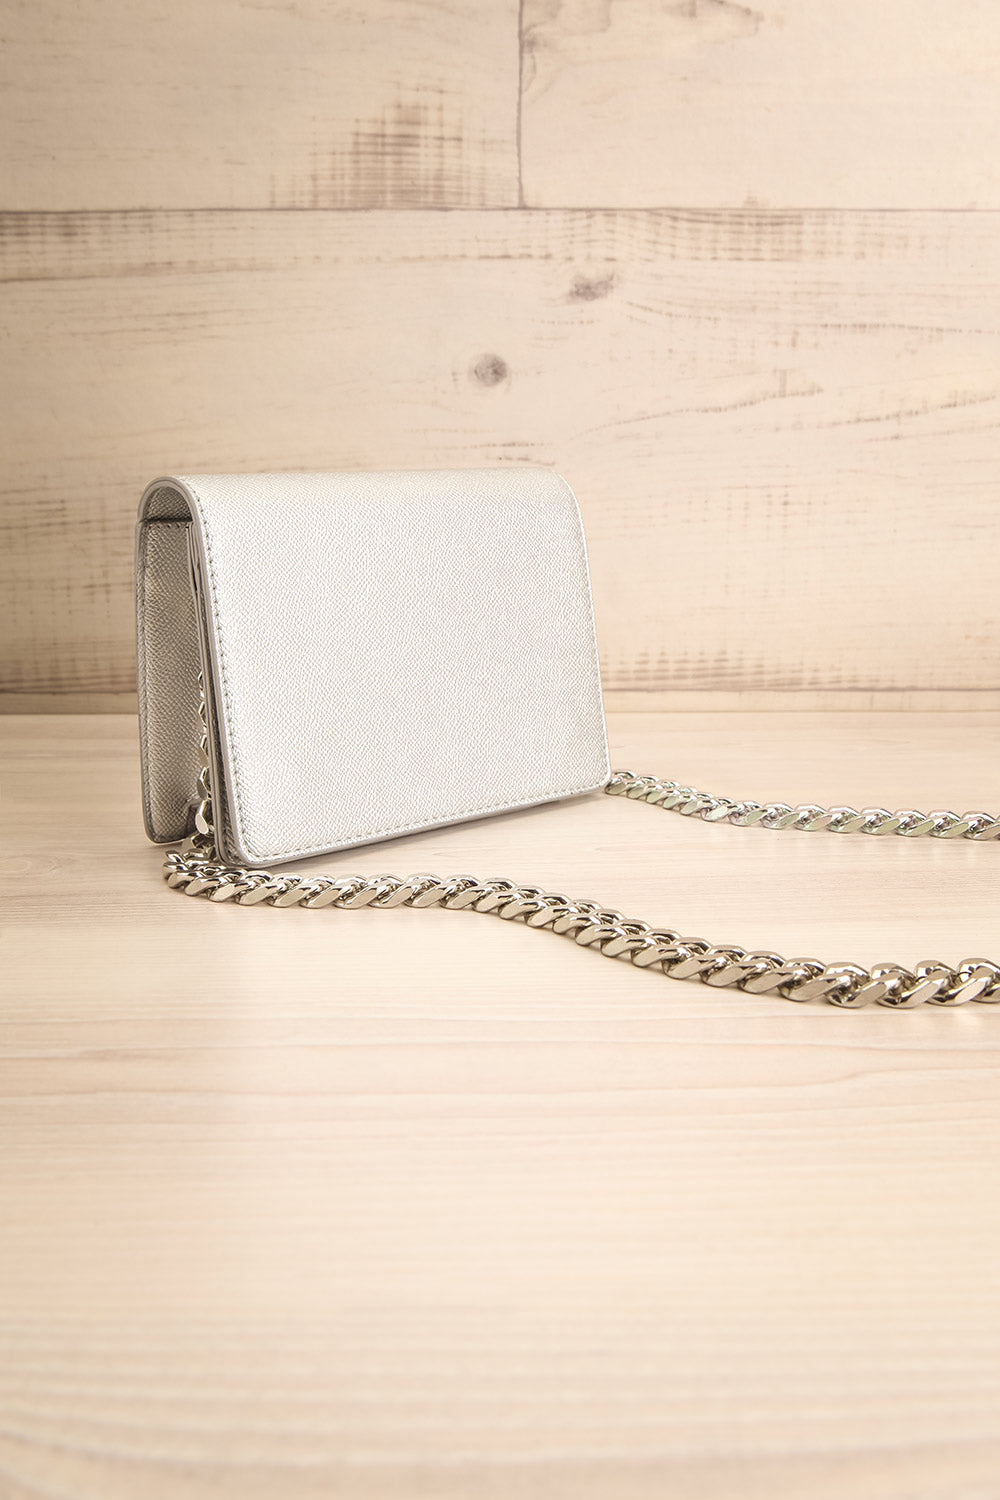 Oxidized and Stone Embedded Purse with Chain Strap | Boontoon